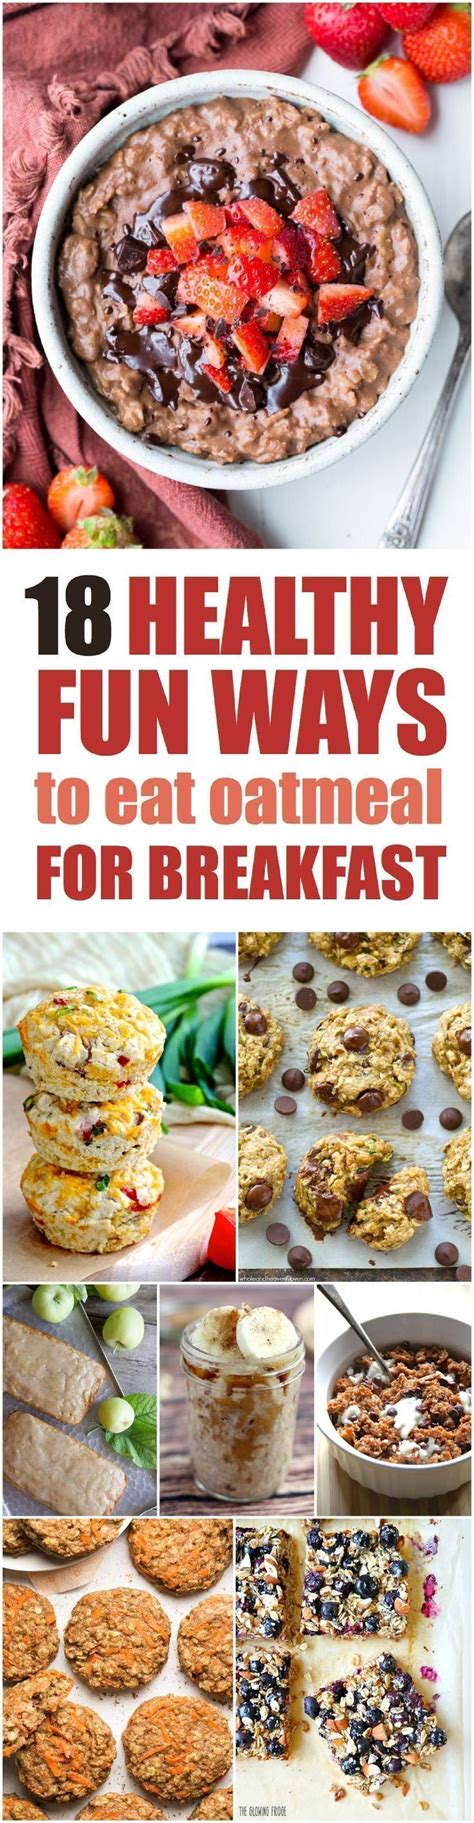 18 Healthy Fun Ways To Eat Oatmeal For Breakfast Six Clever Sisters